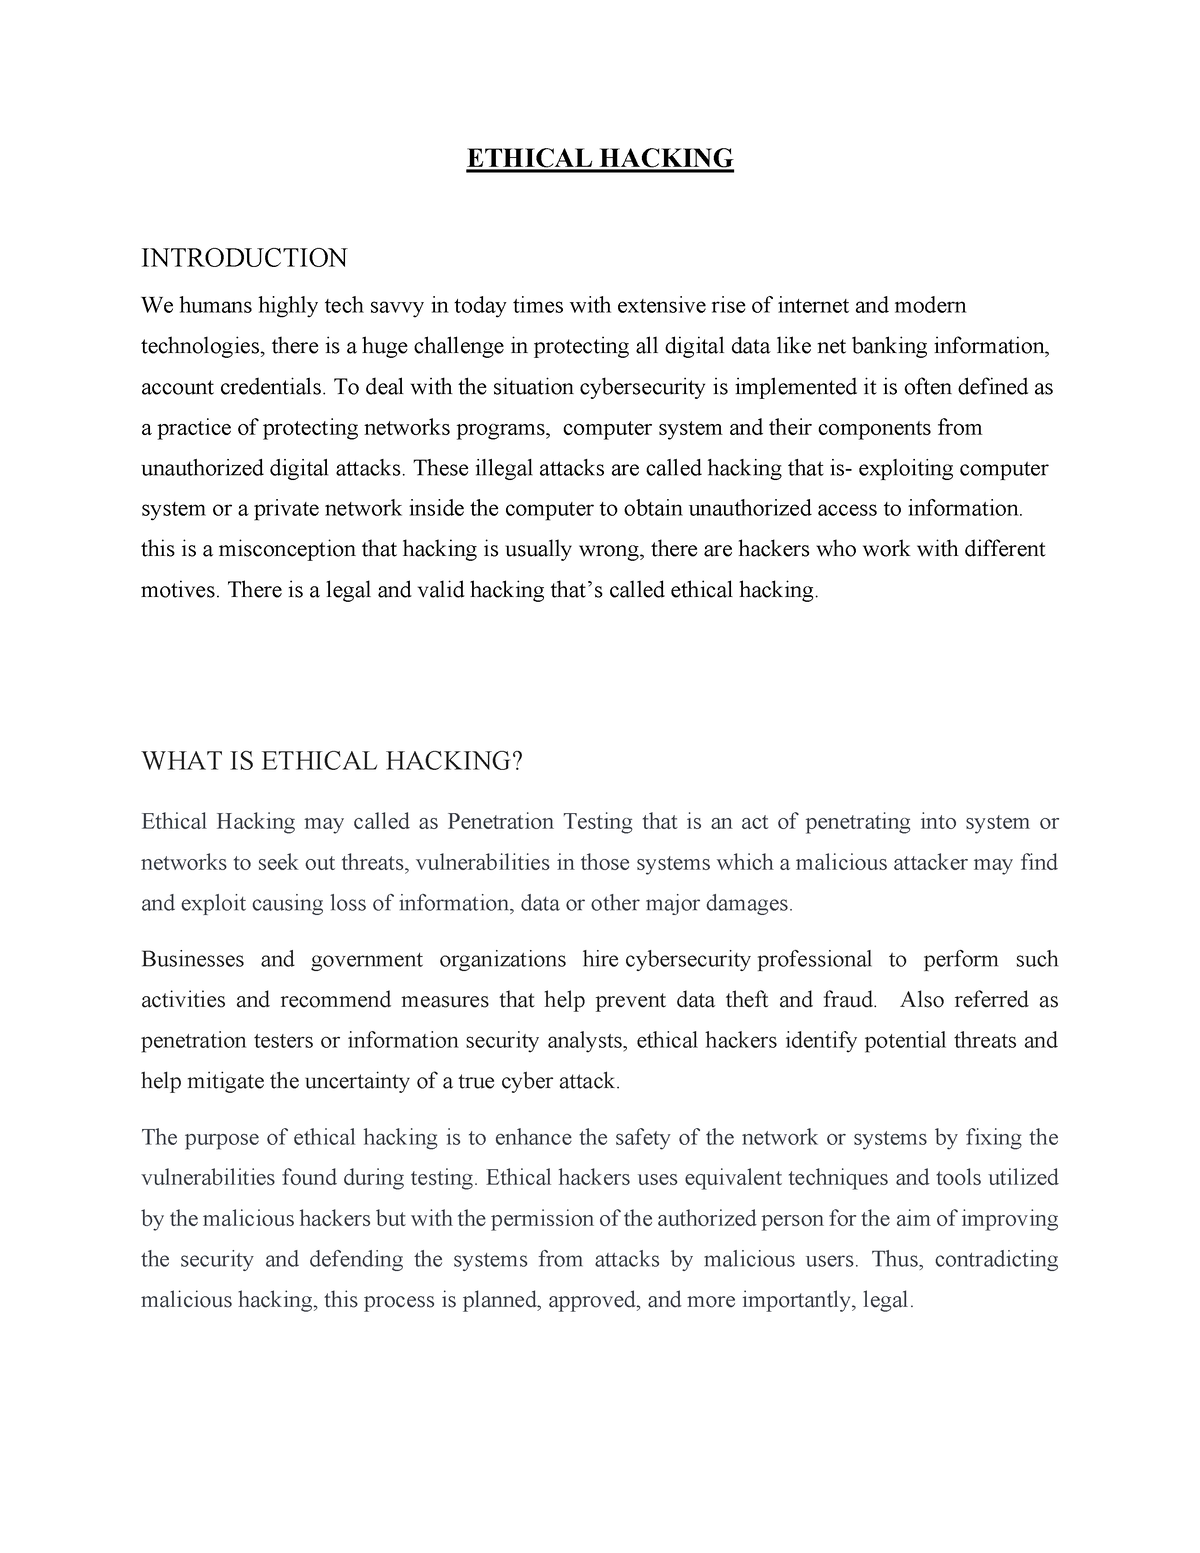 essay on ethical hacking